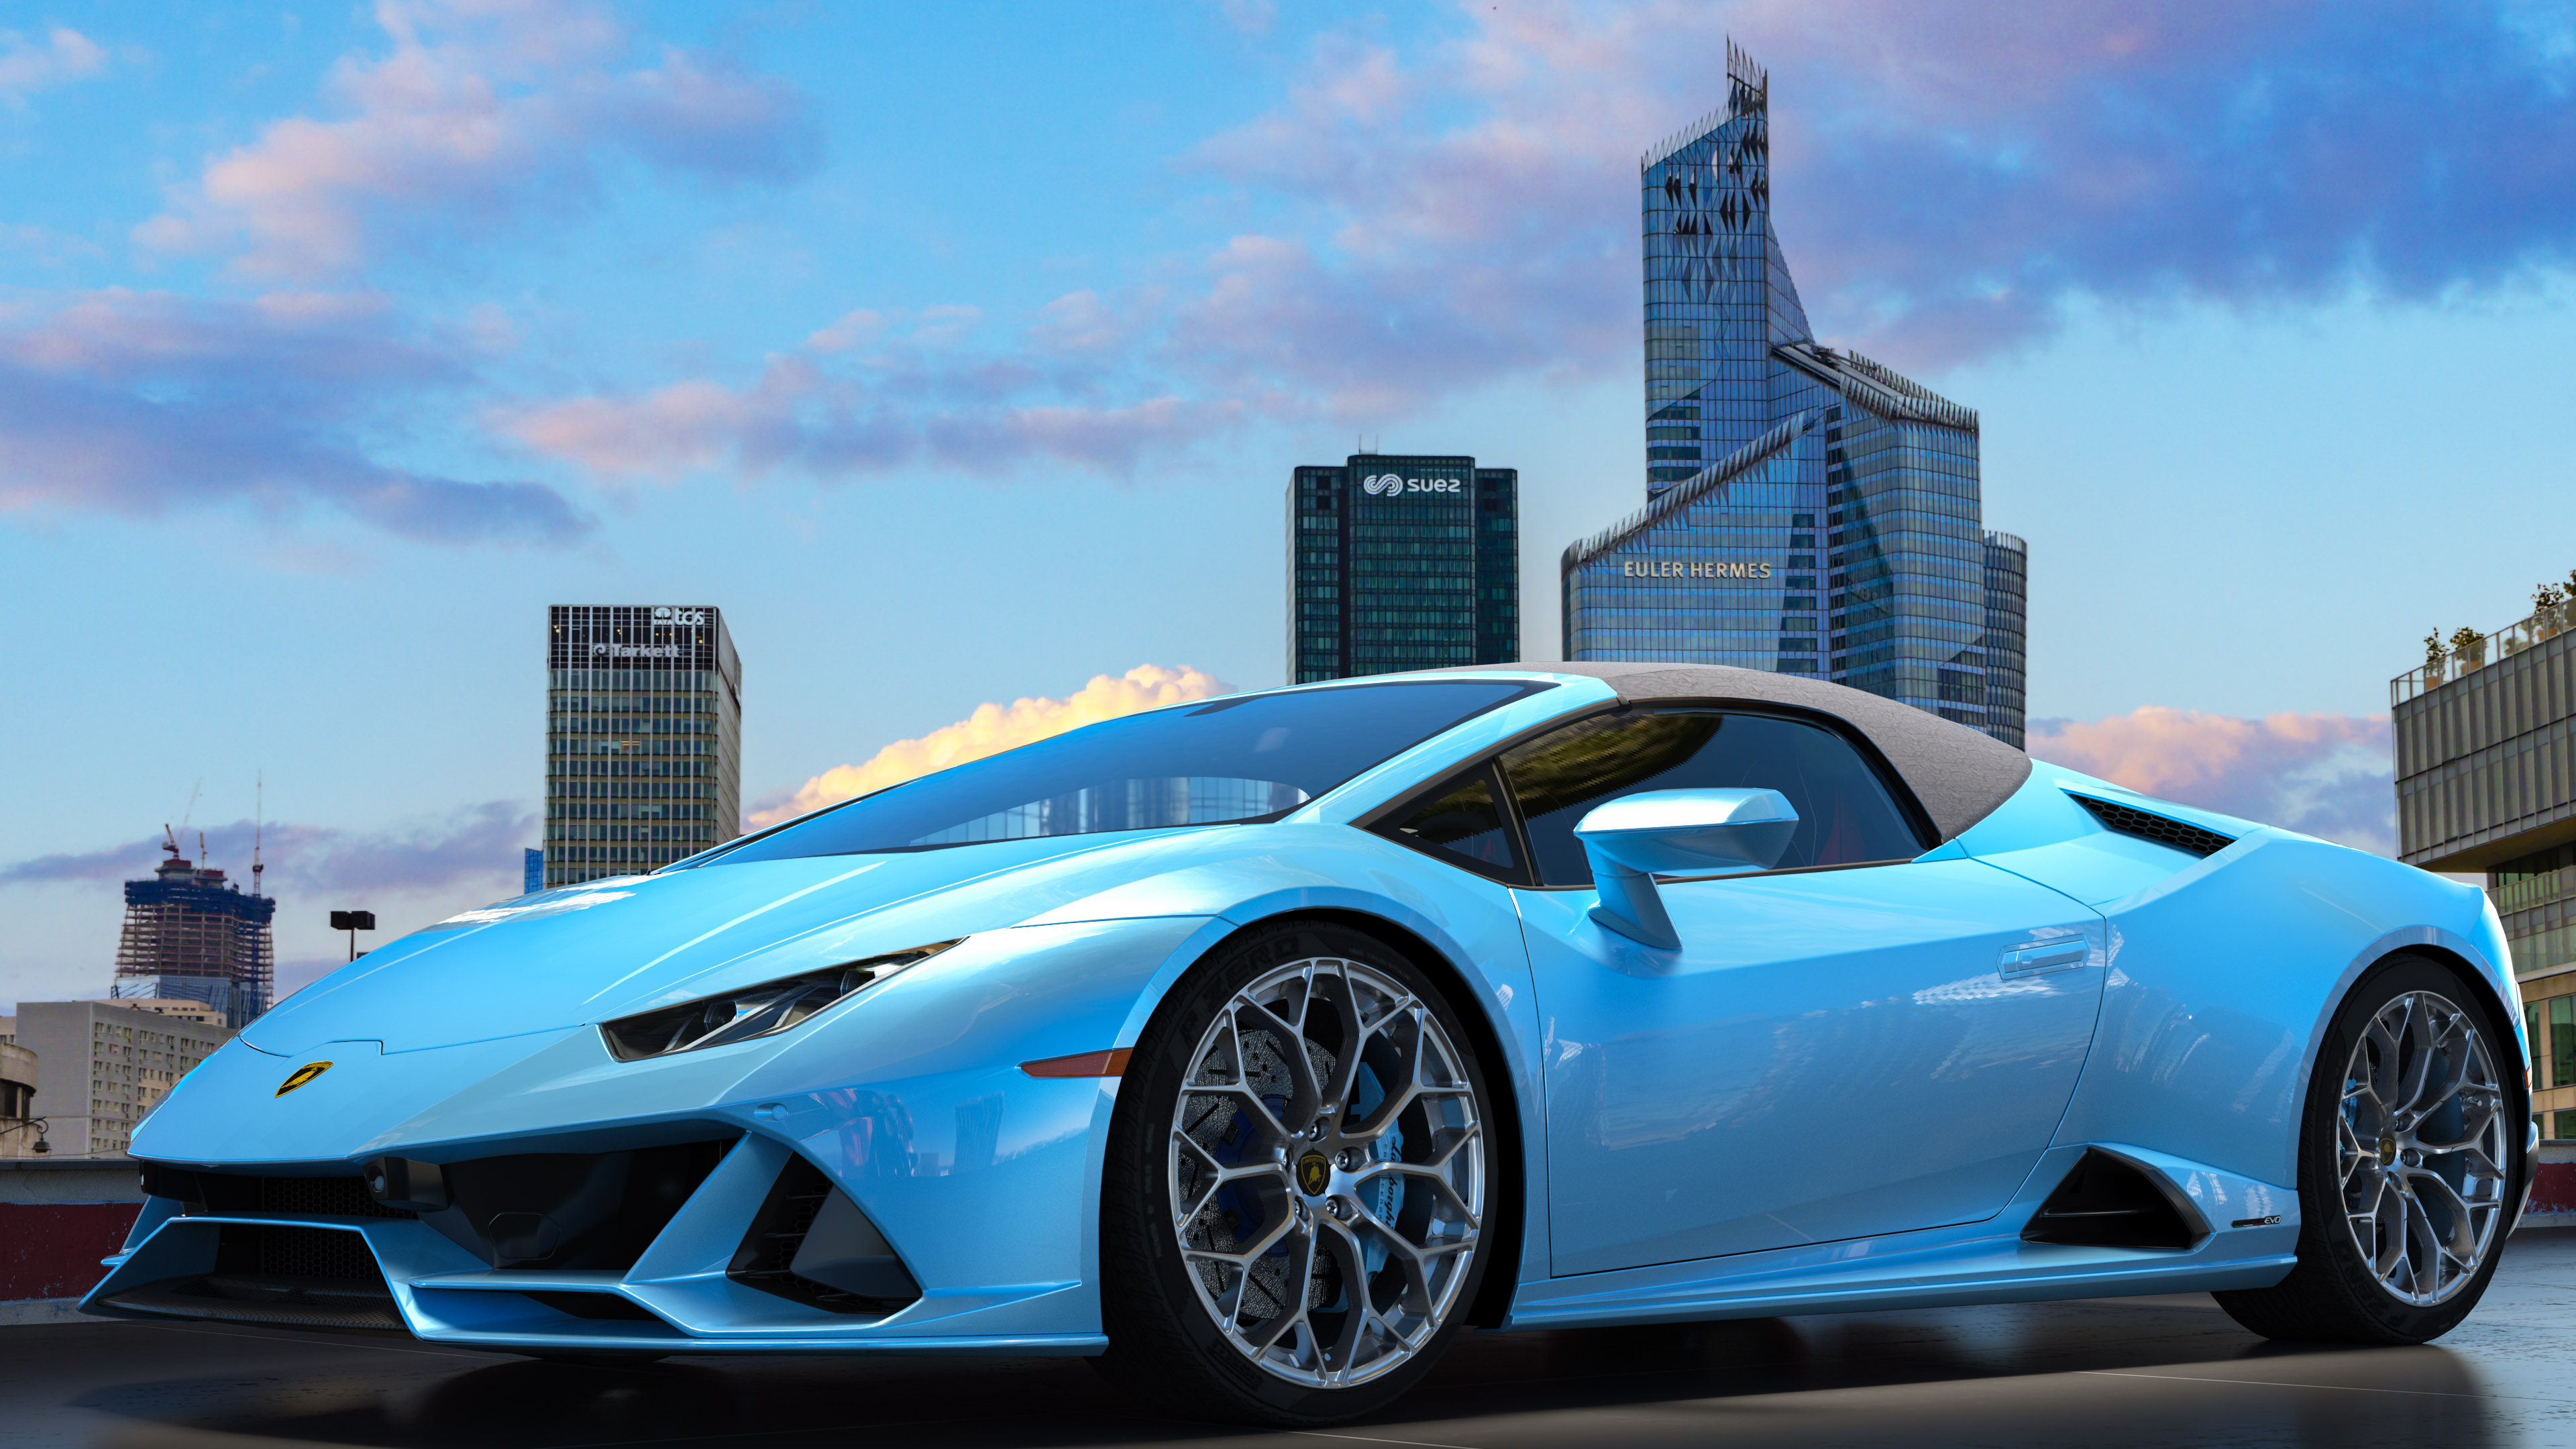 Savor the speed of the Lamborghini Huracan with our 4K super car wallpaper, a testament to Italian engineering and design.